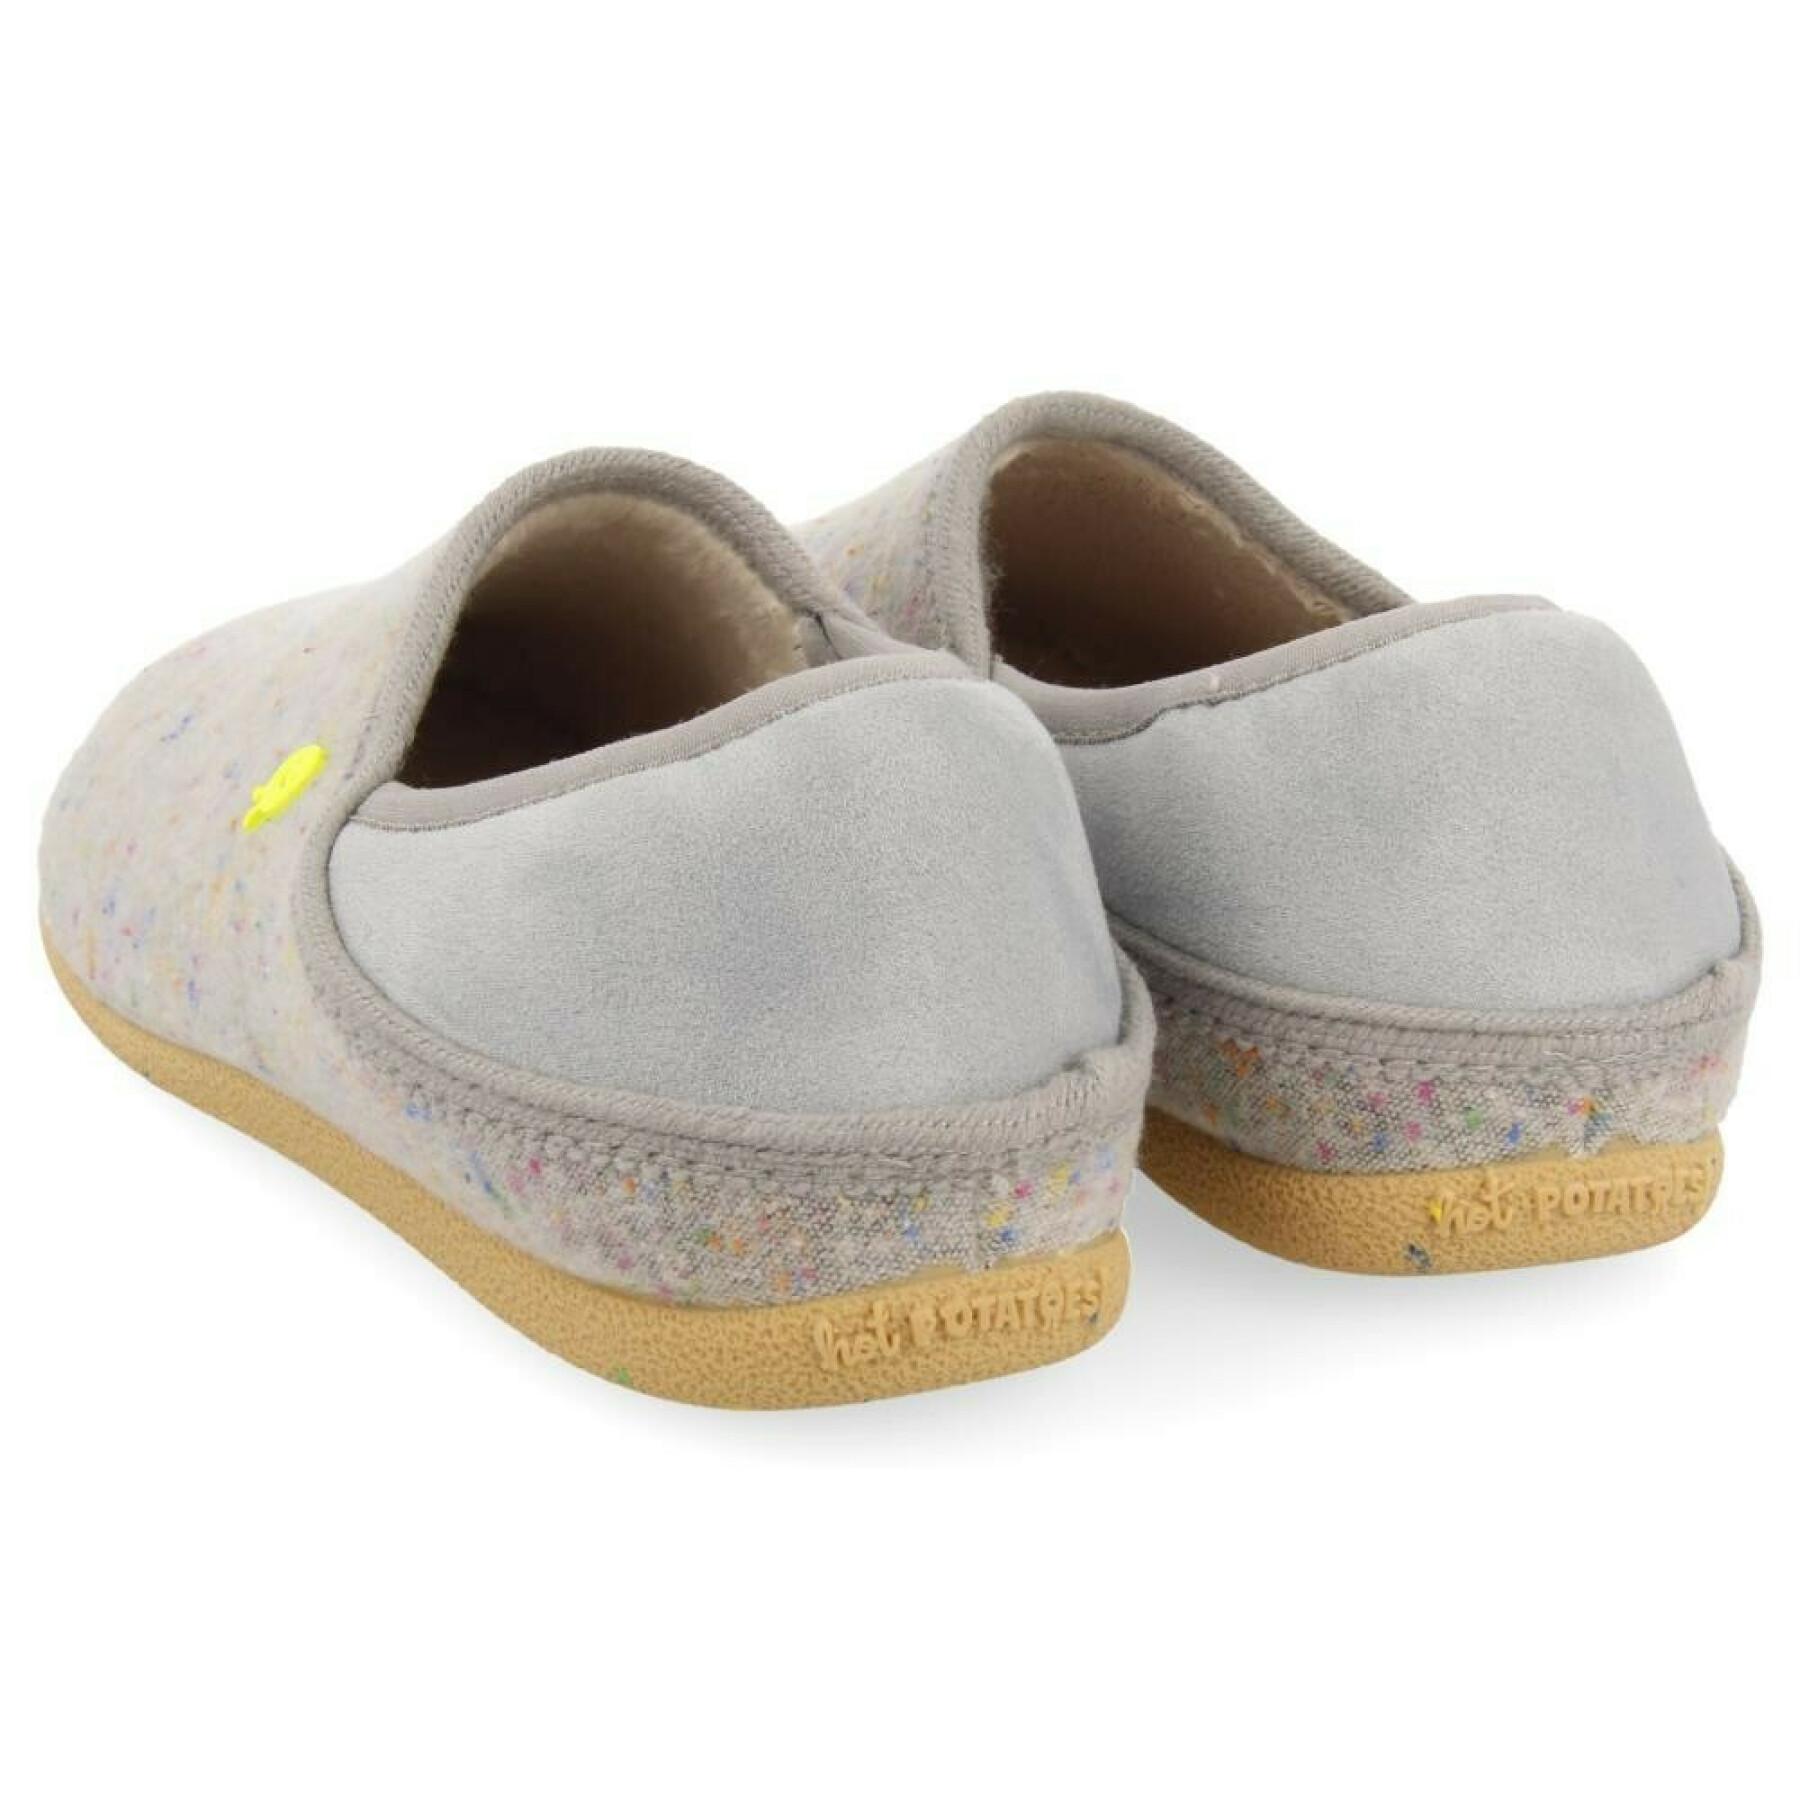 Slippers from the women's collection Hot Potatoes ebensee